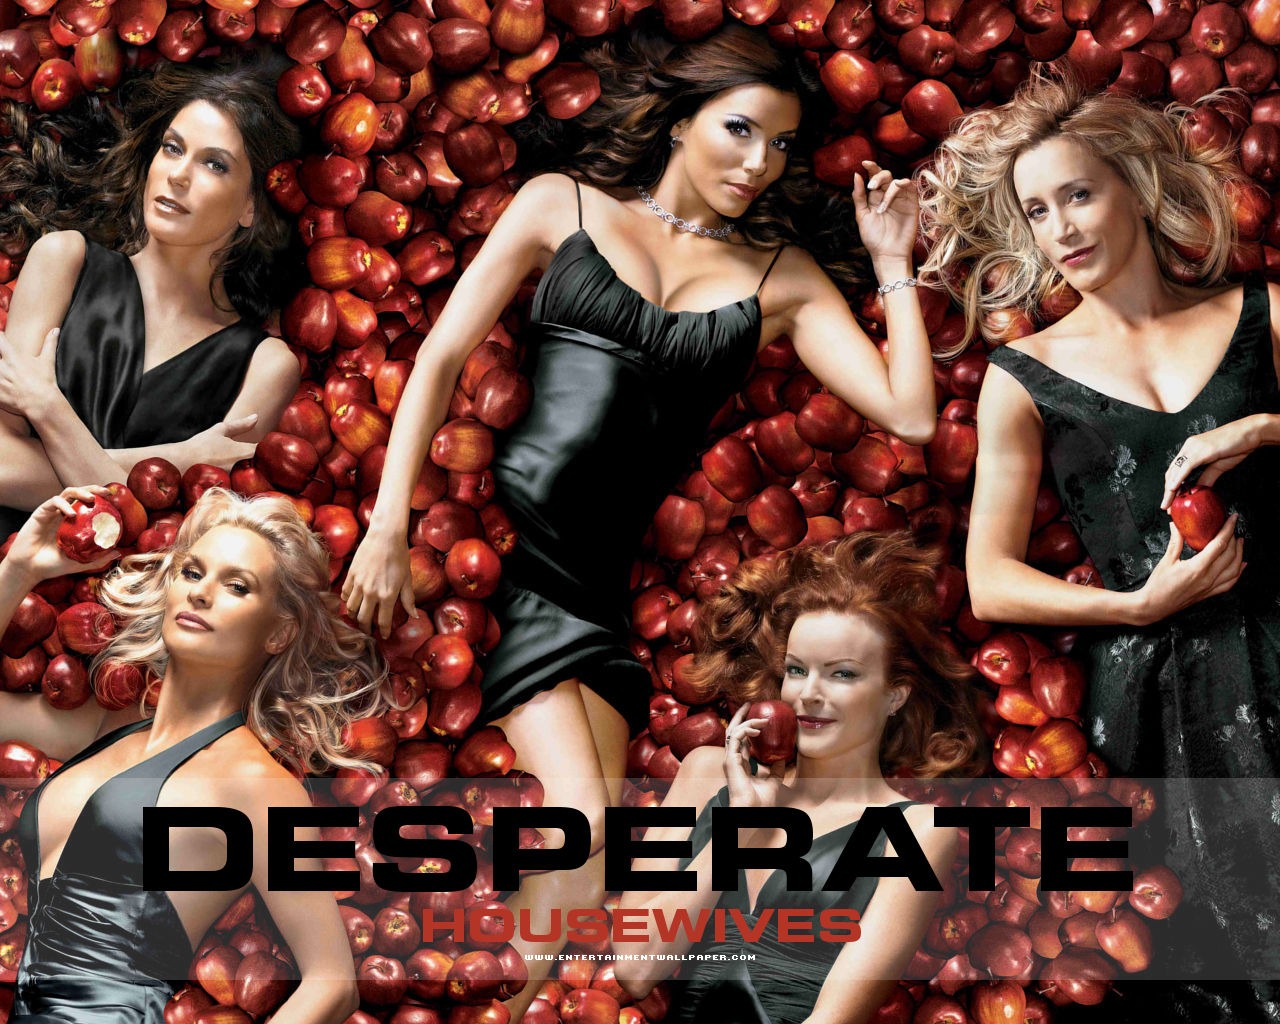 Desperate Housewives wallpaper #36 - 1280x1024